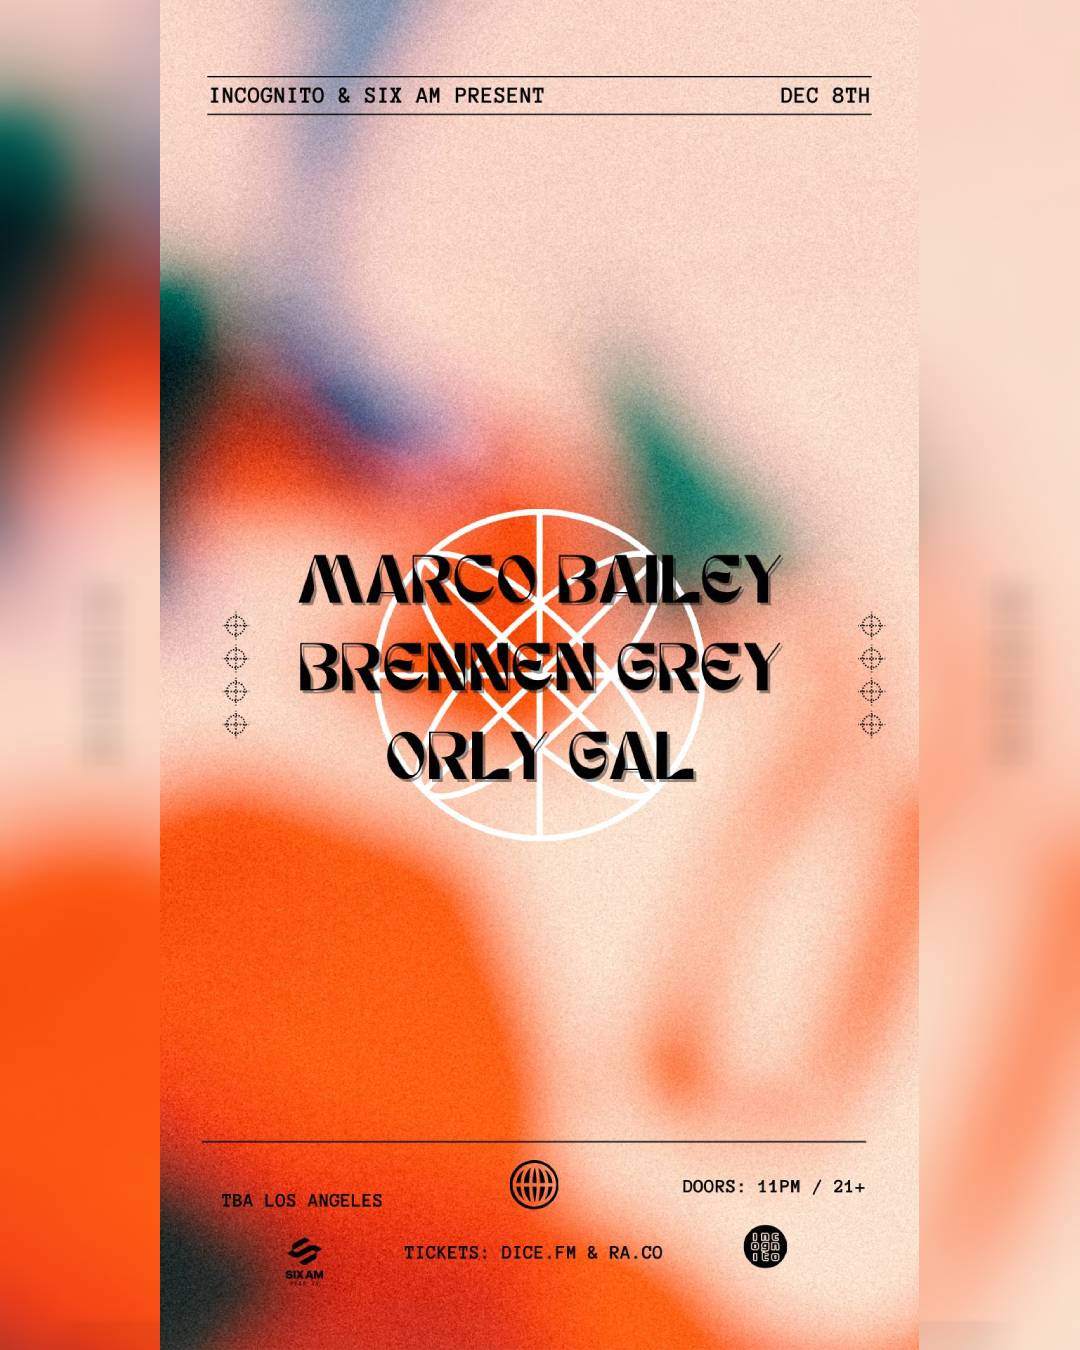 INCOGNITO x SIX AM present Marco Bailey, Brennen Grey and Orly Gal - Página frontal